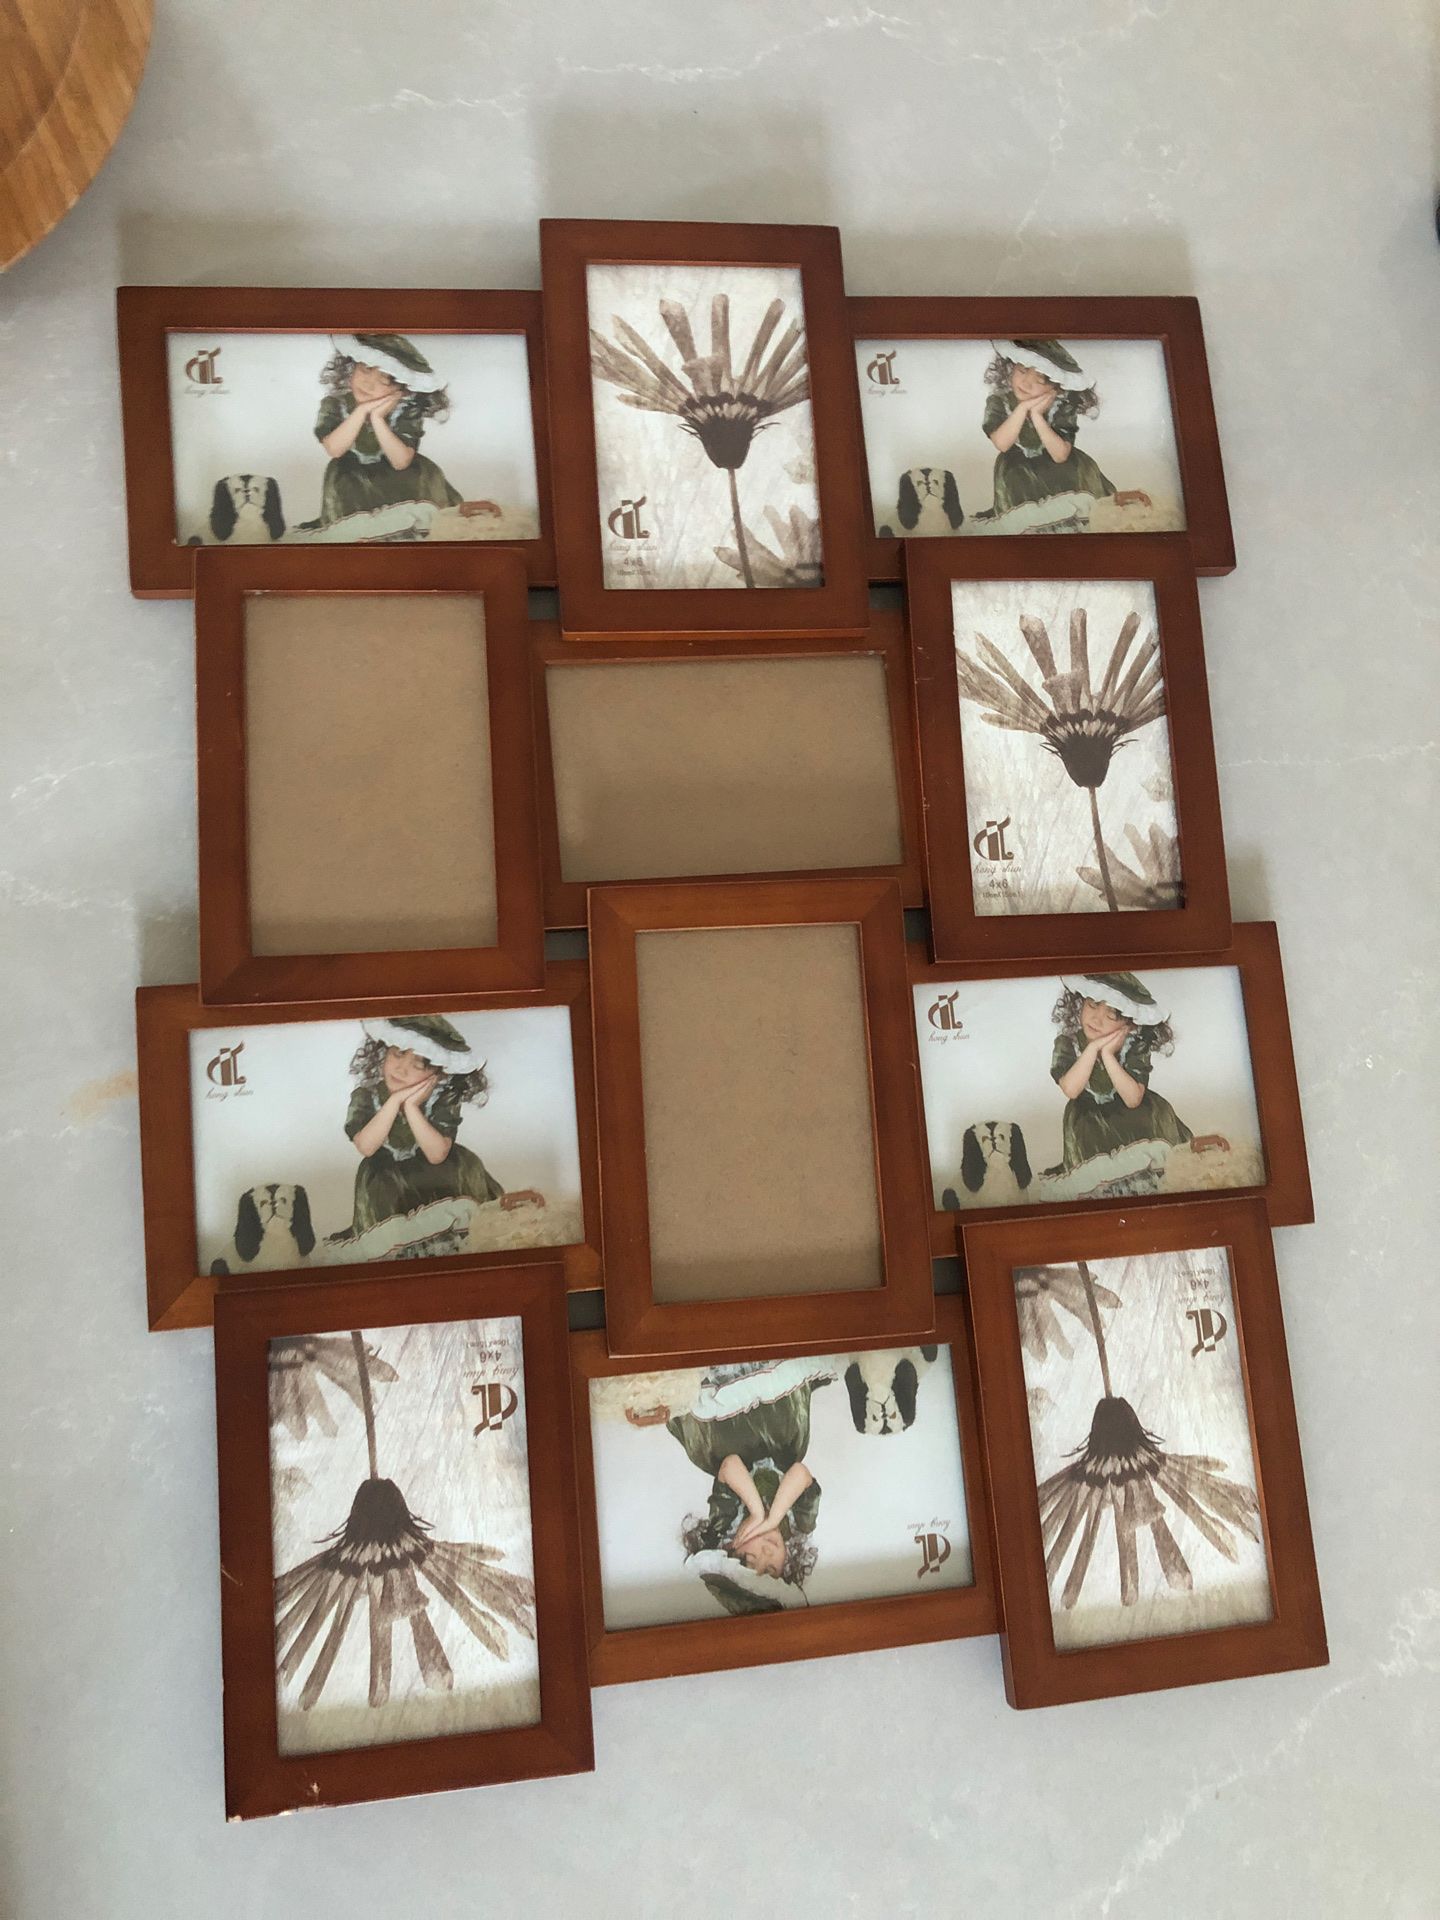 FREE picture frame. Fits 12 pictures